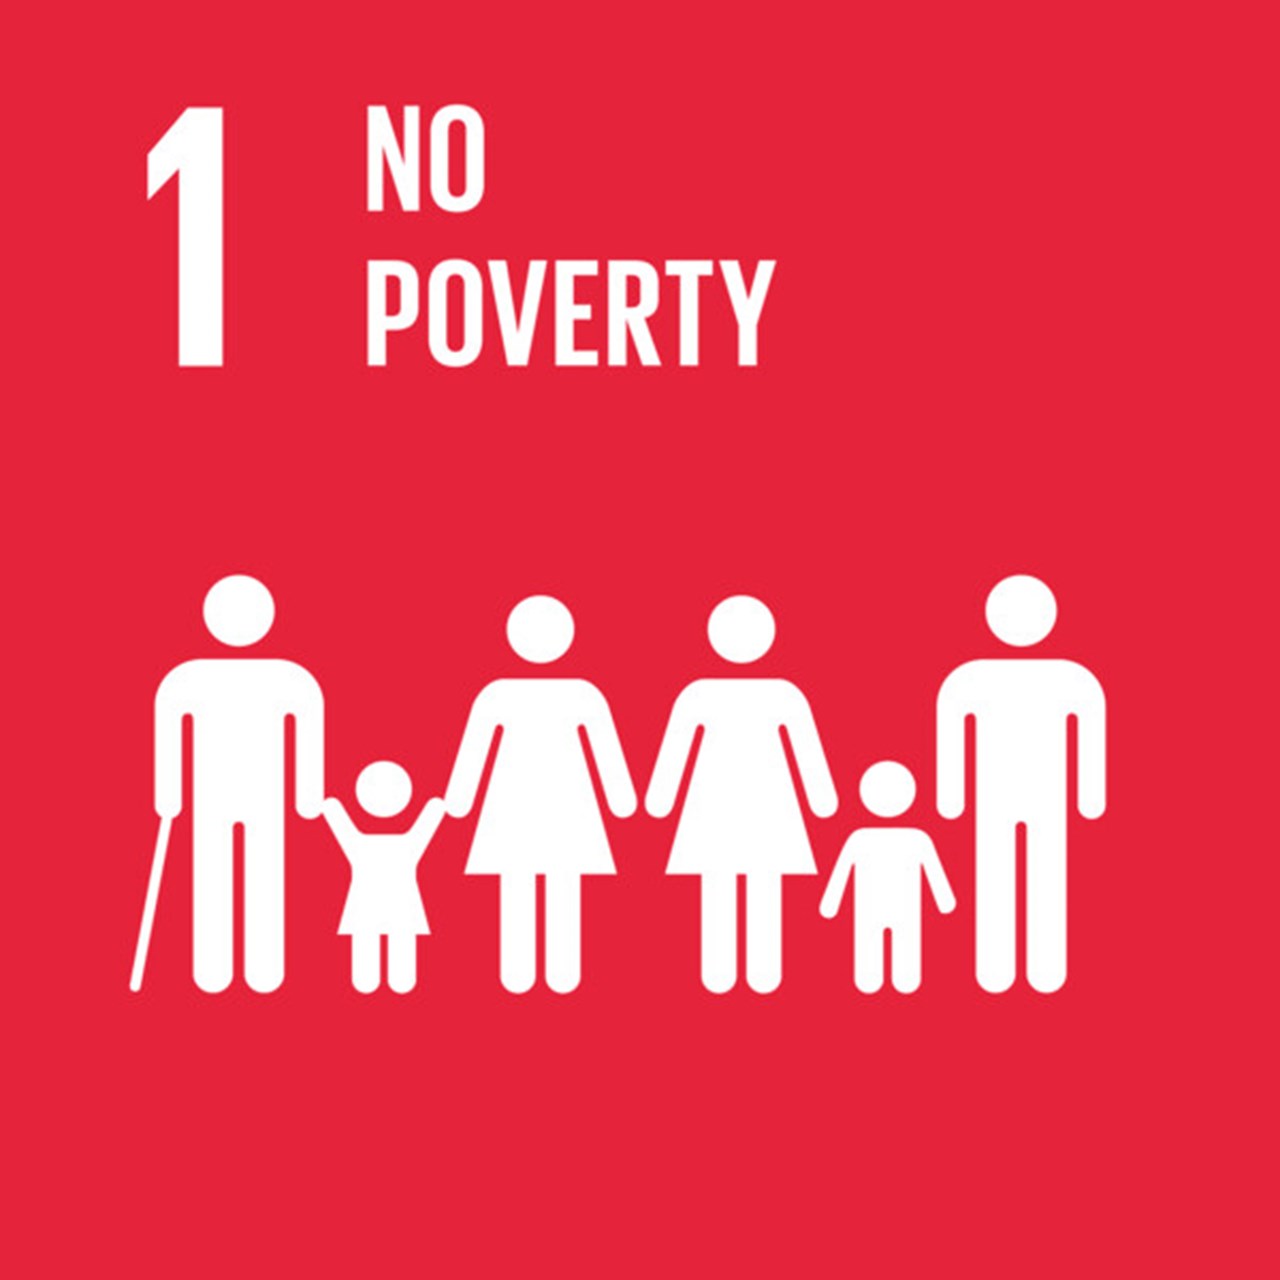 The Global Goals, Goal 1 - No Poverty